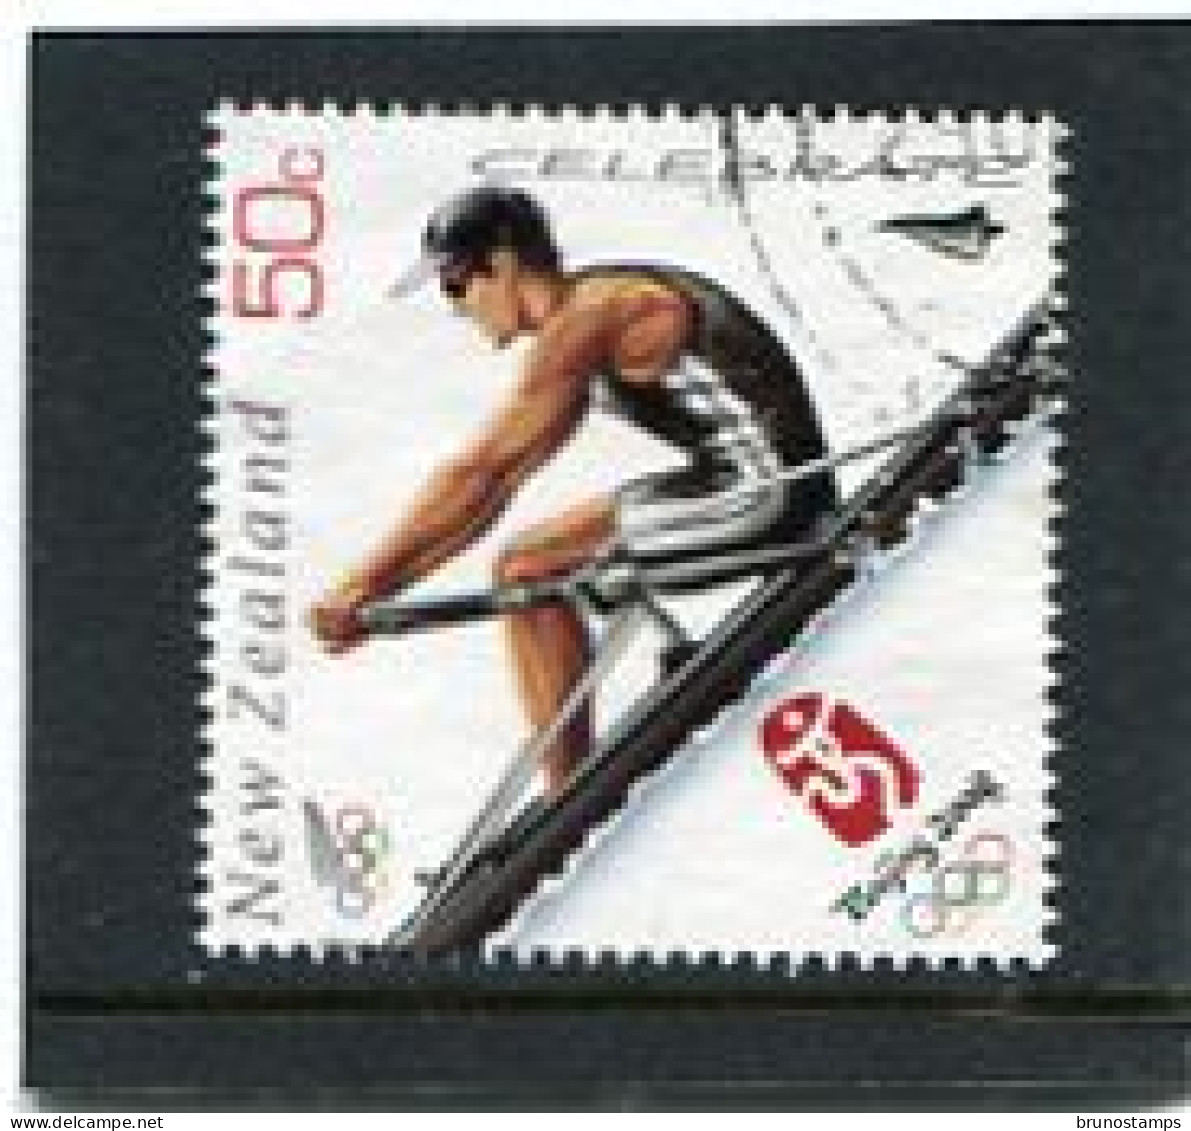 NEW ZEALAND - 2008  50c  ROWING  FINE  USED - Used Stamps